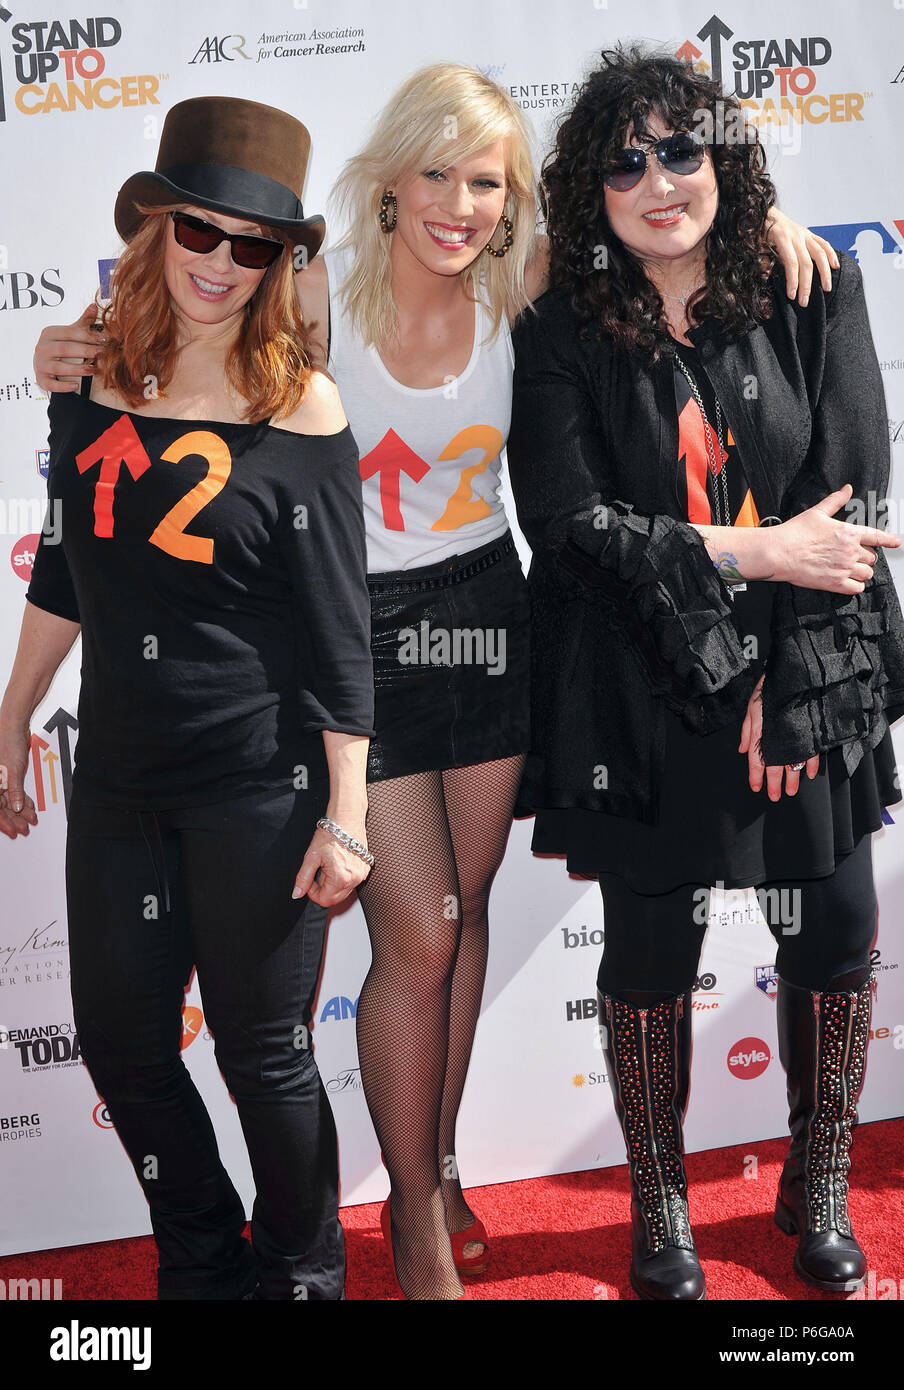 Nancy Wilson, Natasha Bedingfield, Ann Wilson 118.jpg Stand Up To Cancer event on the Sony Lot In Los Angeles.Nancy Wilson, Natasha Bedingfield, Ann Wilson 118  Event in Hollywood Life - California, Red Carpet Event, USA, Film Industry, Celebrities, Photography, Bestof, Arts Culture and Entertainment, Topix Celebrities fashion, Best of, Hollywood Life, Event in Hollywood Life - California, Red Carpet and backstage, ,Arts Culture and Entertainment, Photography,    inquiry tsuni@Gamma-USA.com ,  Music celebrities, Musician, Music Group, 2010 Stock Photo